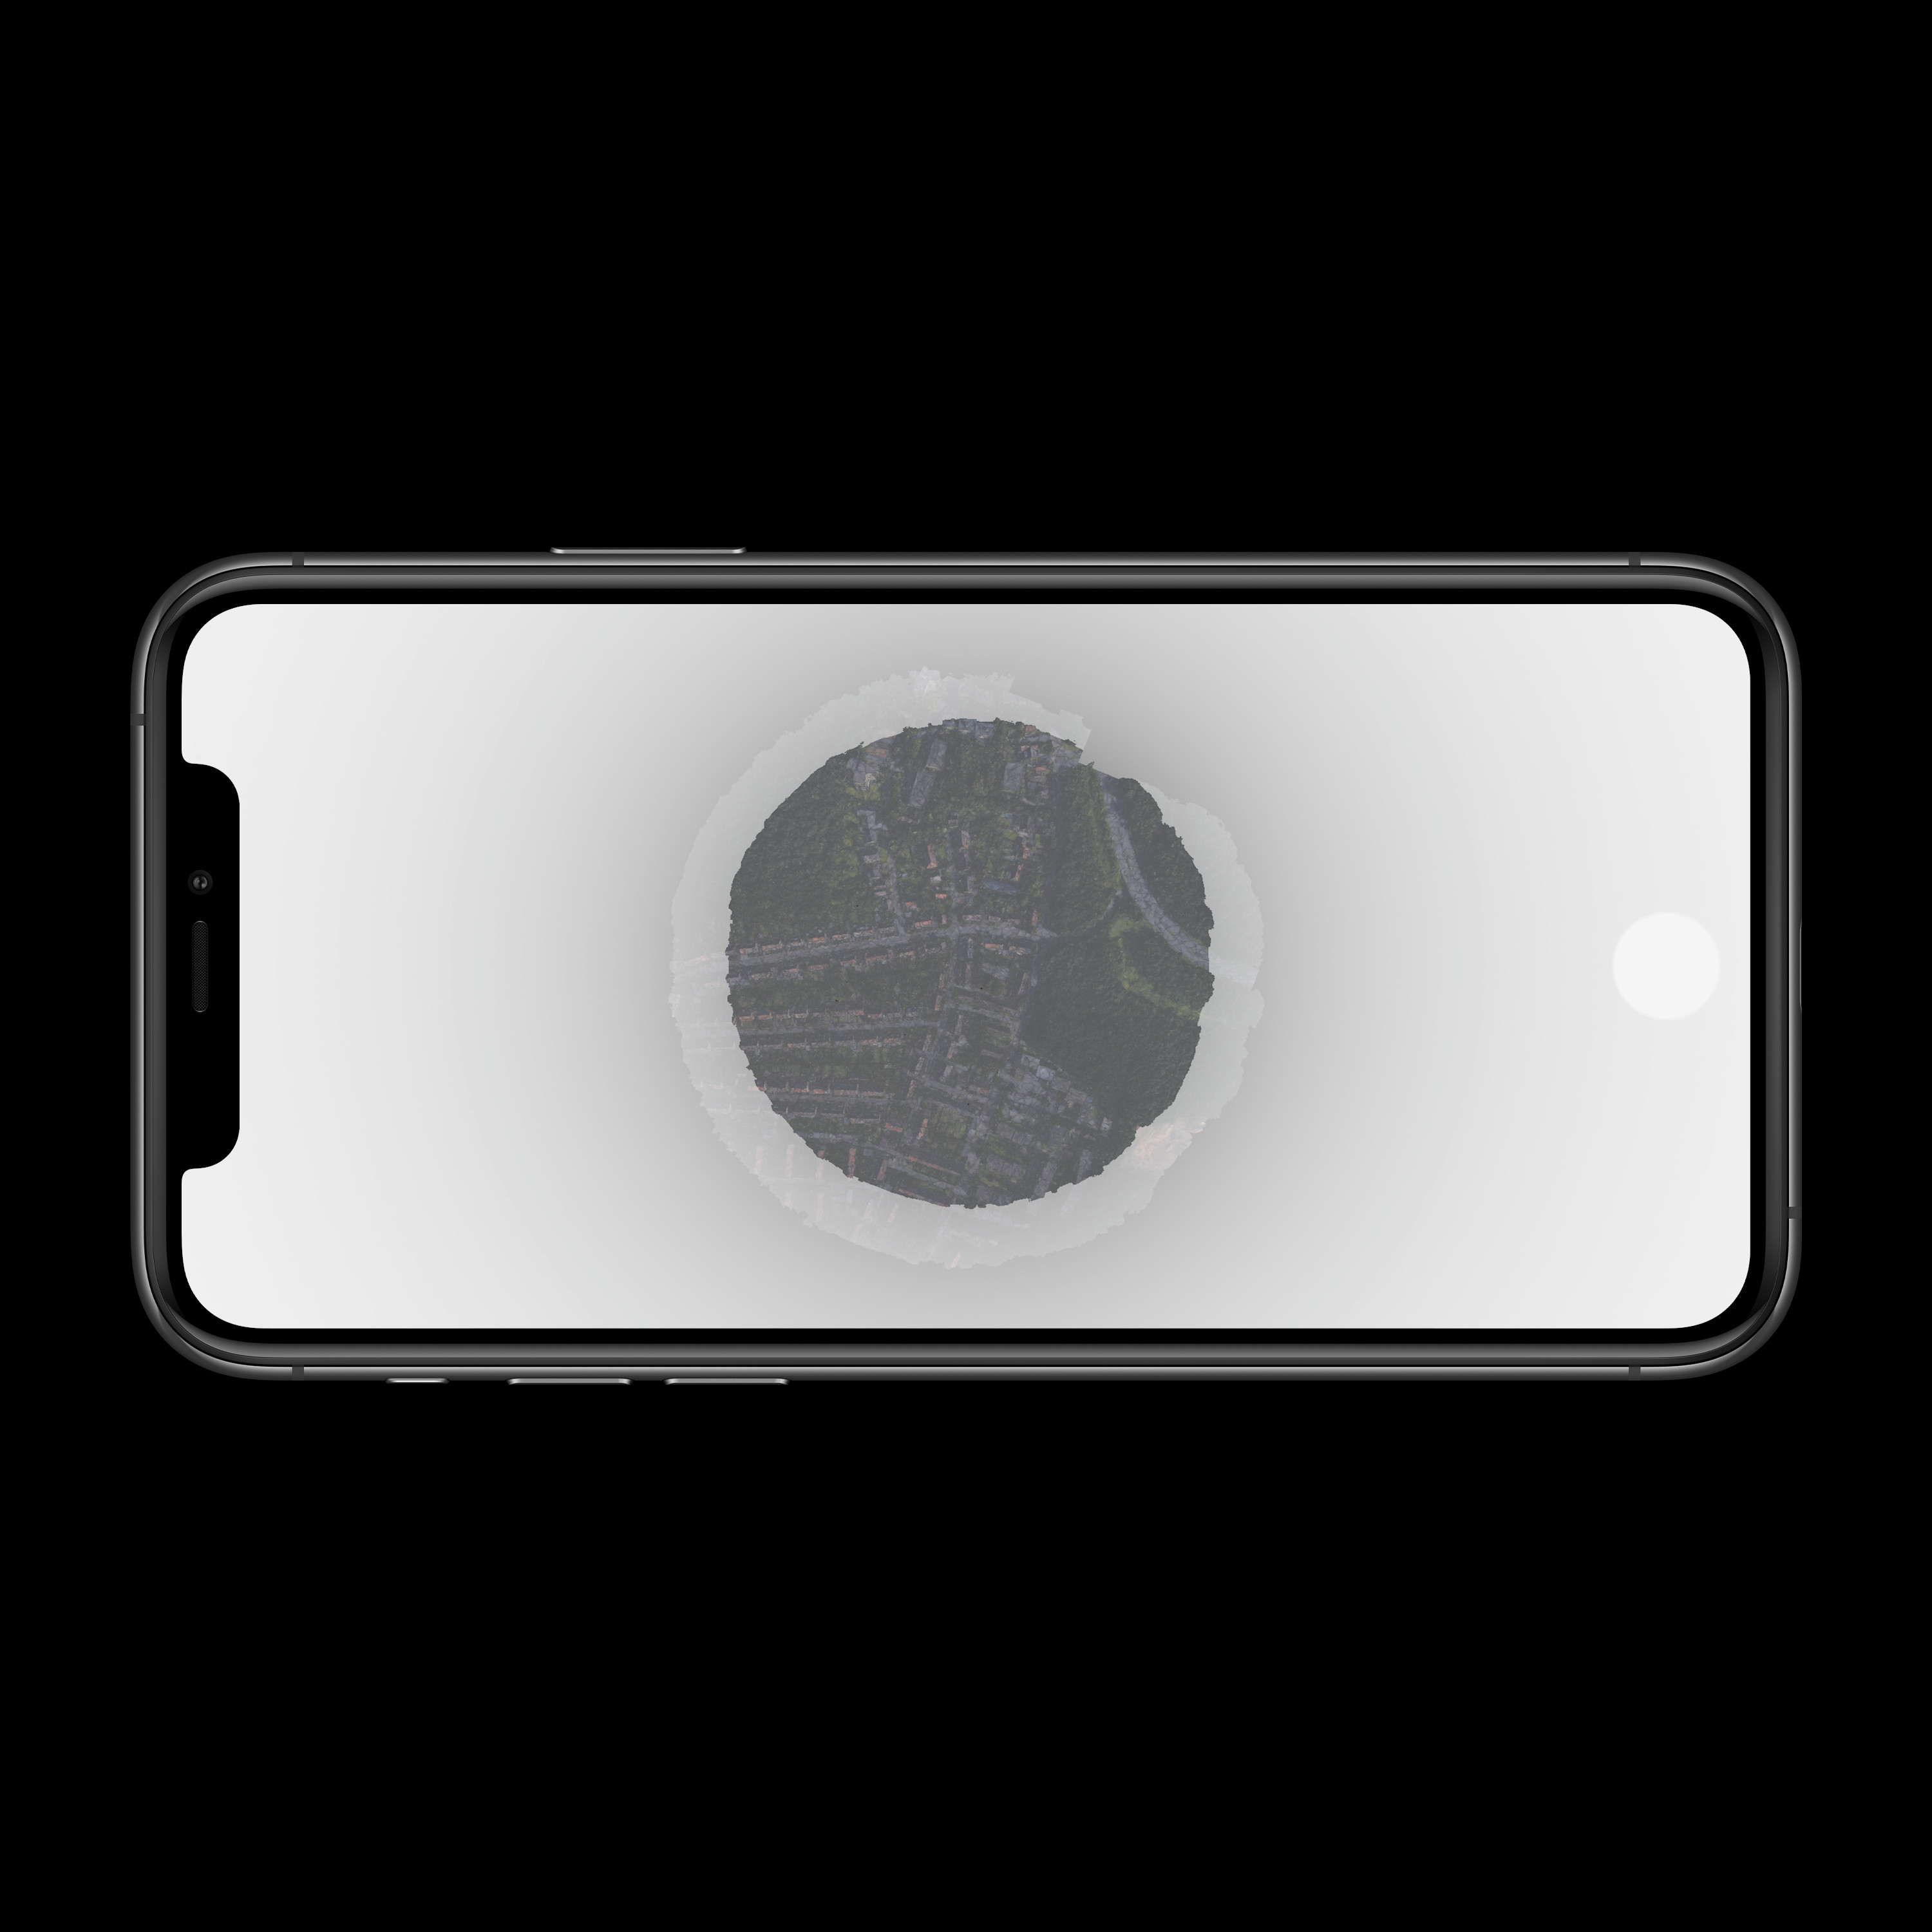 smartphone with circular landscape viewd from the top, disapperaing into fog